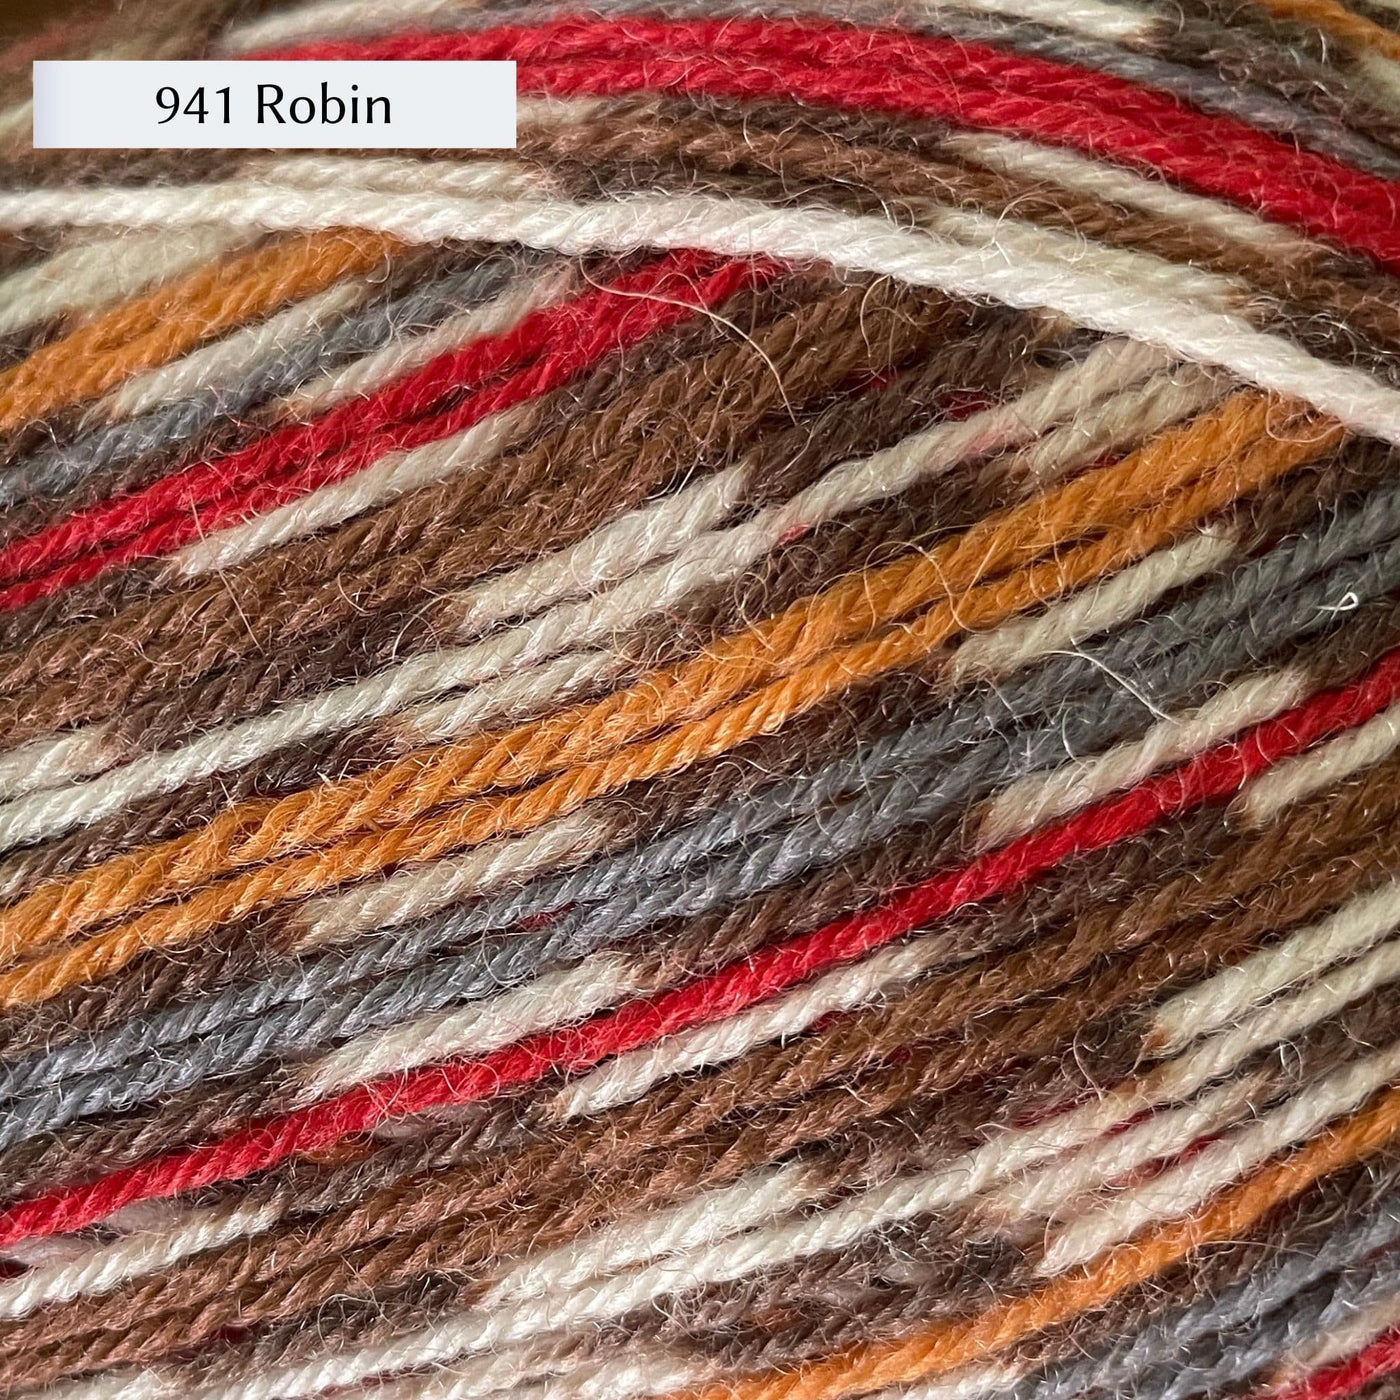 West Yorkshire Spinners Signature 4ply yarn, fingering weight, in color 941 Robin, a bird-inspired colorway with red, white, copper, brown and steel grey, and a self-patterning section of brown and white